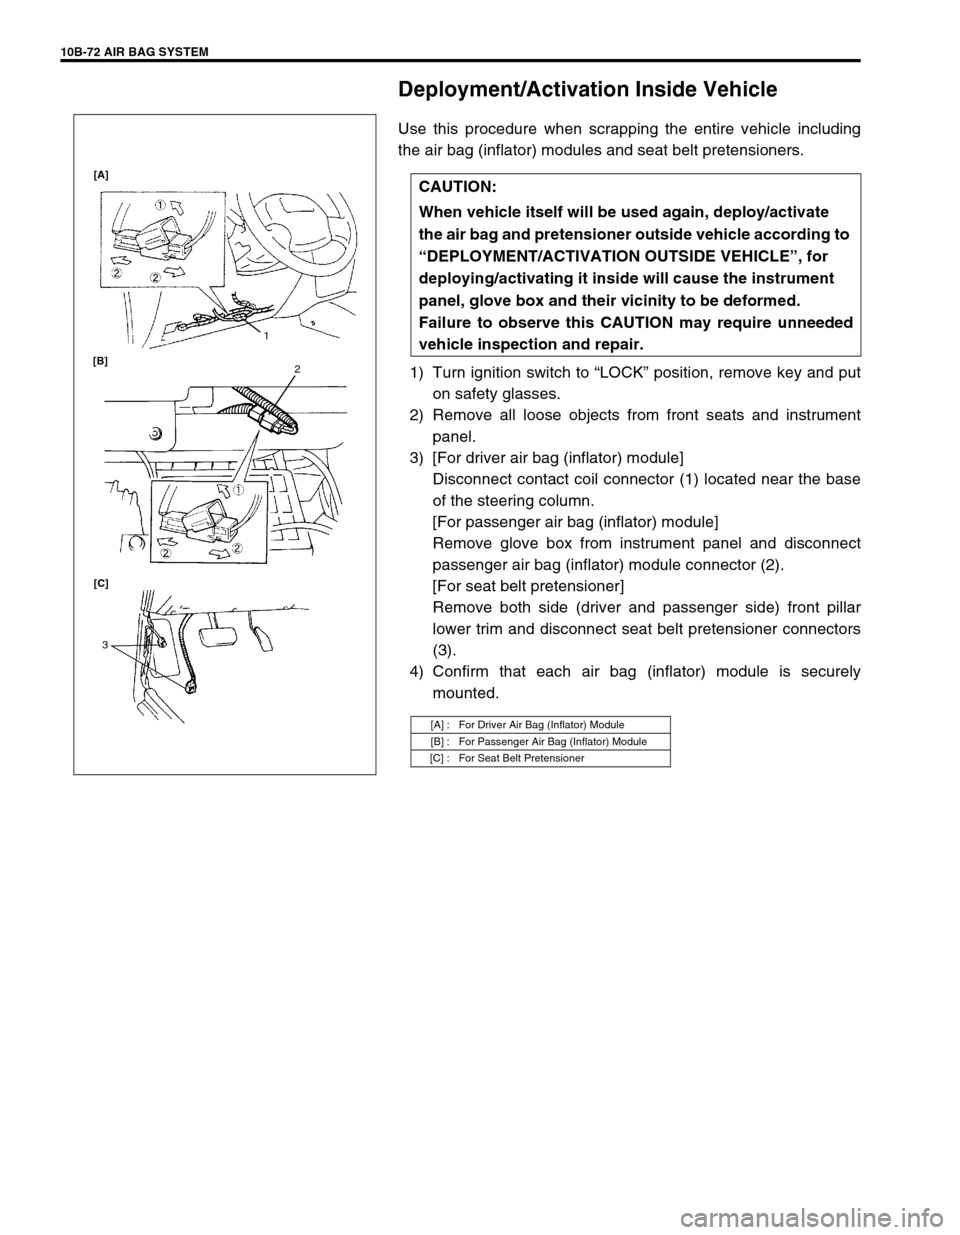 SUZUKI GRAND VITARA 2001 2.G Owners Manual 10B-72 AIR BAG SYSTEM
Deployment/Activation Inside Vehicle
Use this procedure when scrapping the entire vehicle including
the air bag (inflator) modules and seat belt pretensioners.
1) Turn ignition s